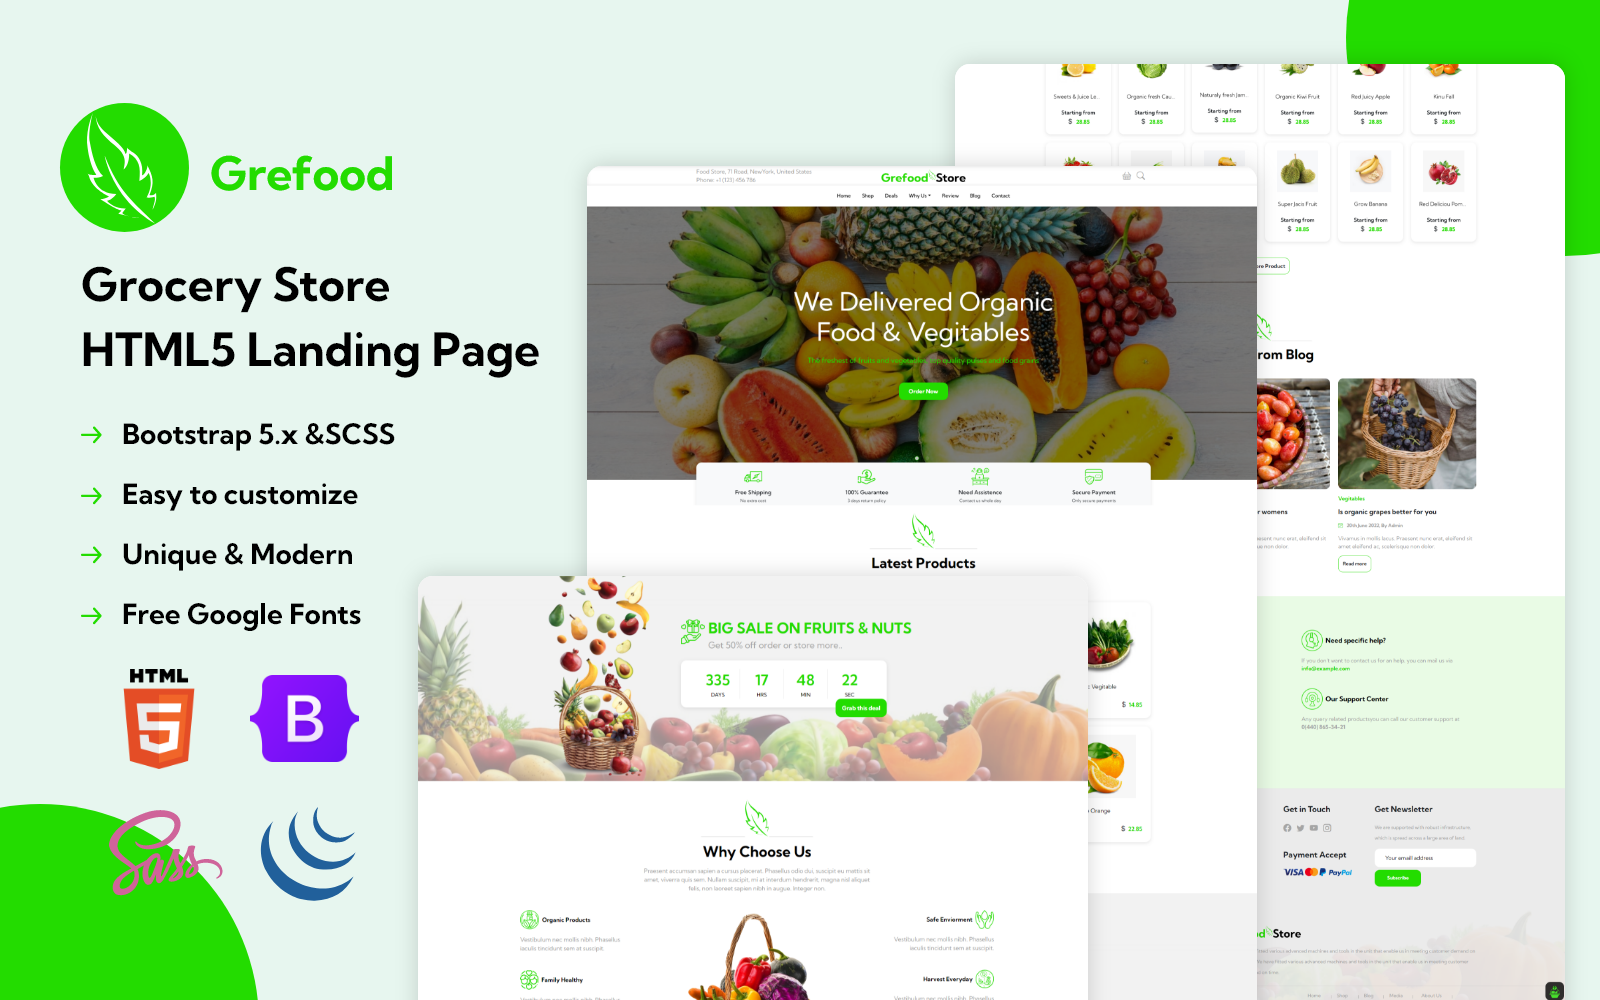 Grefood - Grocery Store HTML5 Landing Page